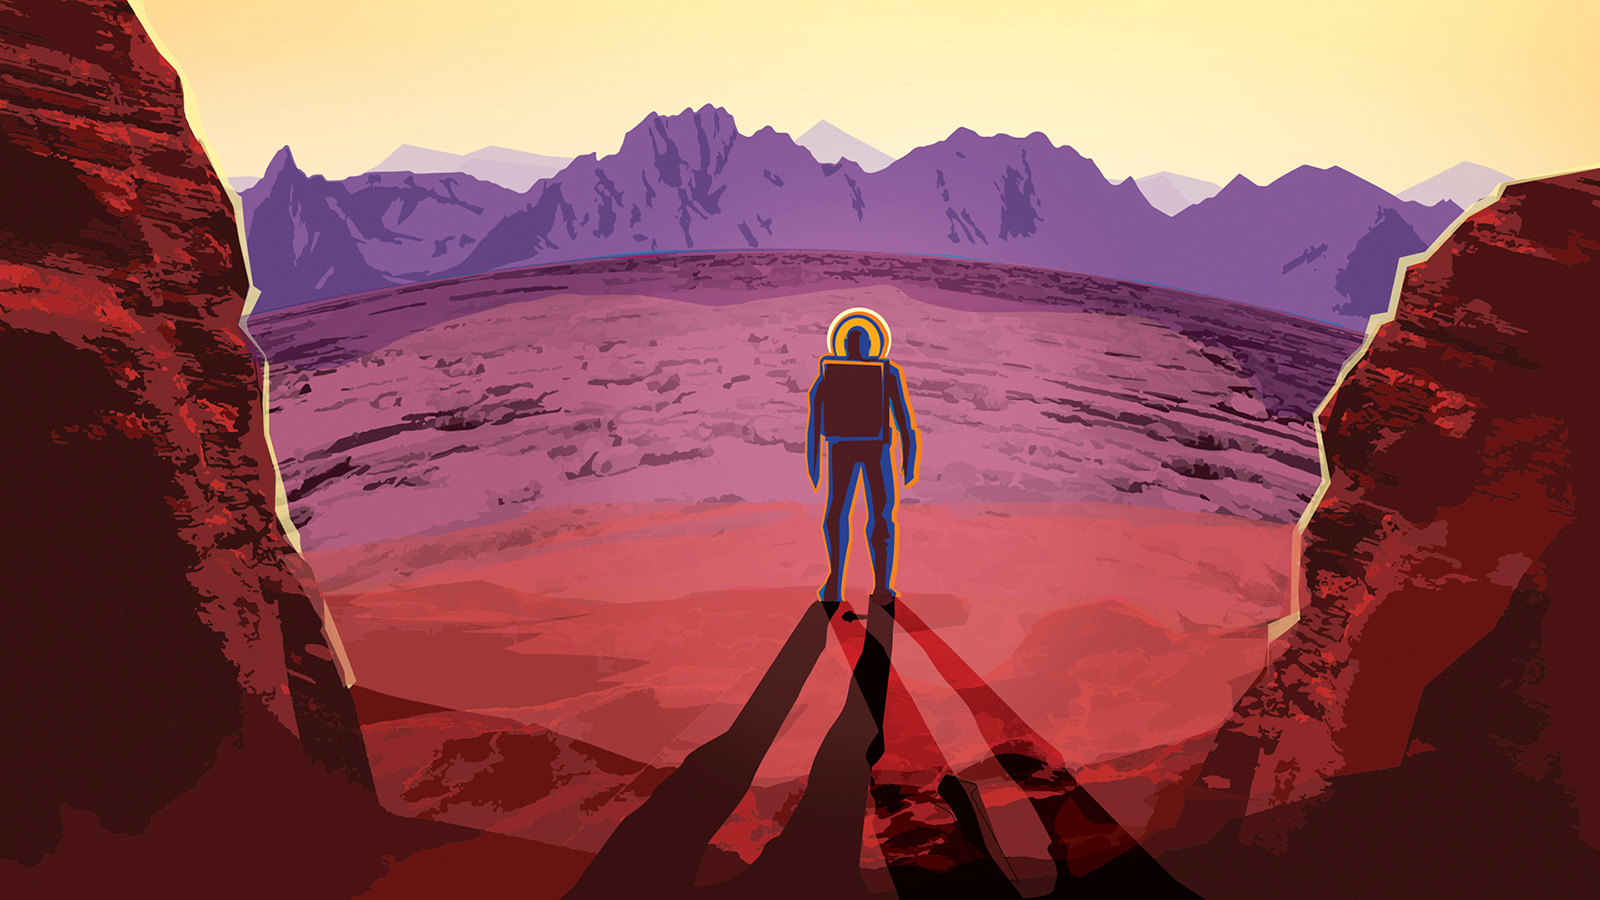 slide 1 - A vintage travel poster image with a traveler standing on the surface of a world with two suns.